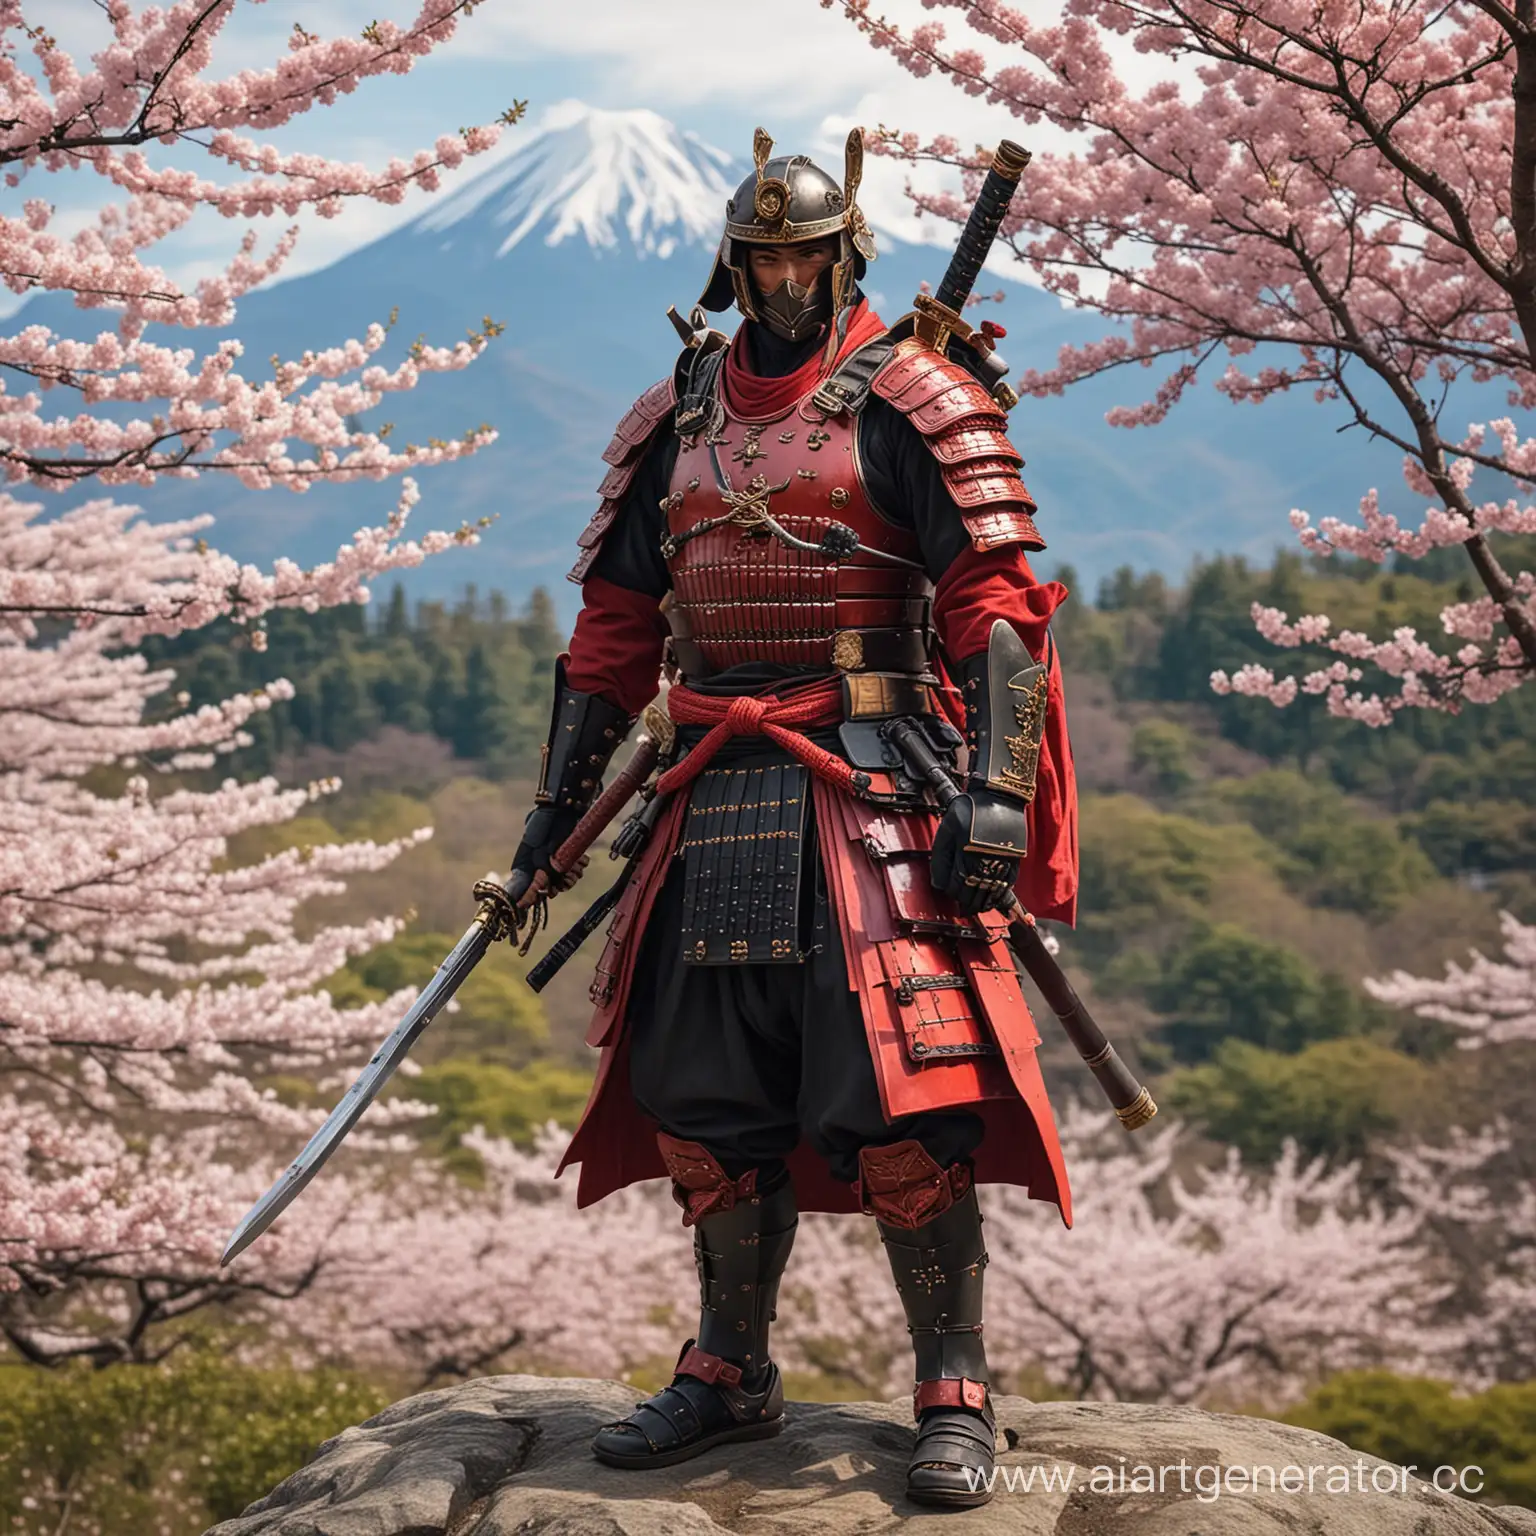 Red-Samurai-Warrior-Amid-Cherry-Blossoms-and-Mountains